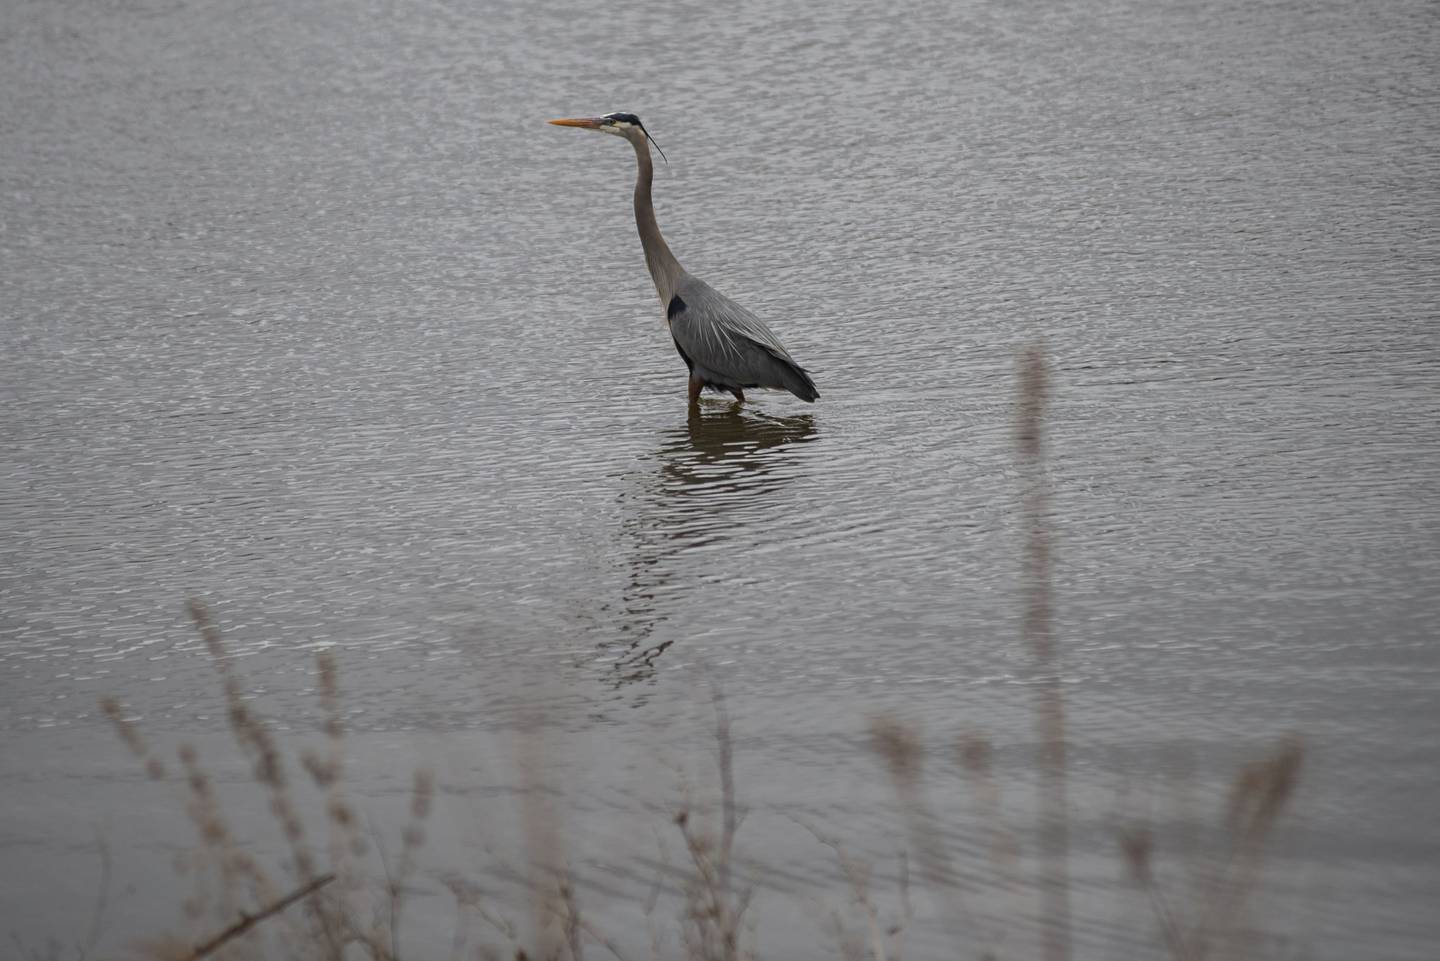 A blue heron takes flight from the Rock River in Dixon Thursday, March 31, 2022 on another gloomy day in the Sauk Valley. The rain is expected to let up on Friday but will be back in full force on Saturday.